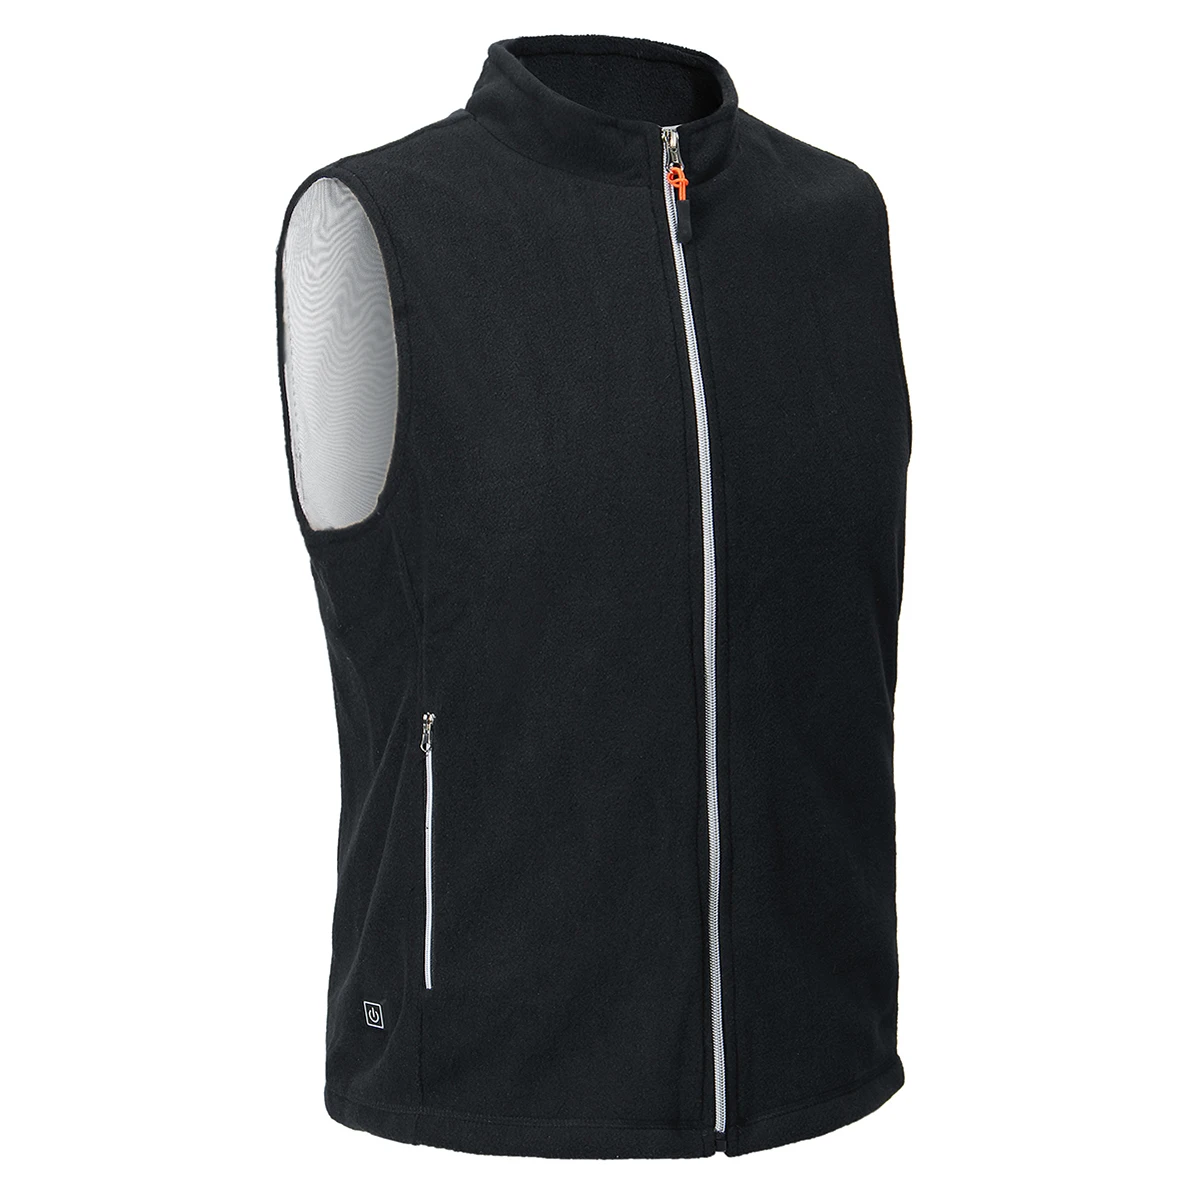 Washable Outdoor USB Infrared Electric Heating Vests Jackets Waterproof Men Women Winter Thermal Warm Clothing Motorcycle Huntin - Цвет: Turtleneck vest